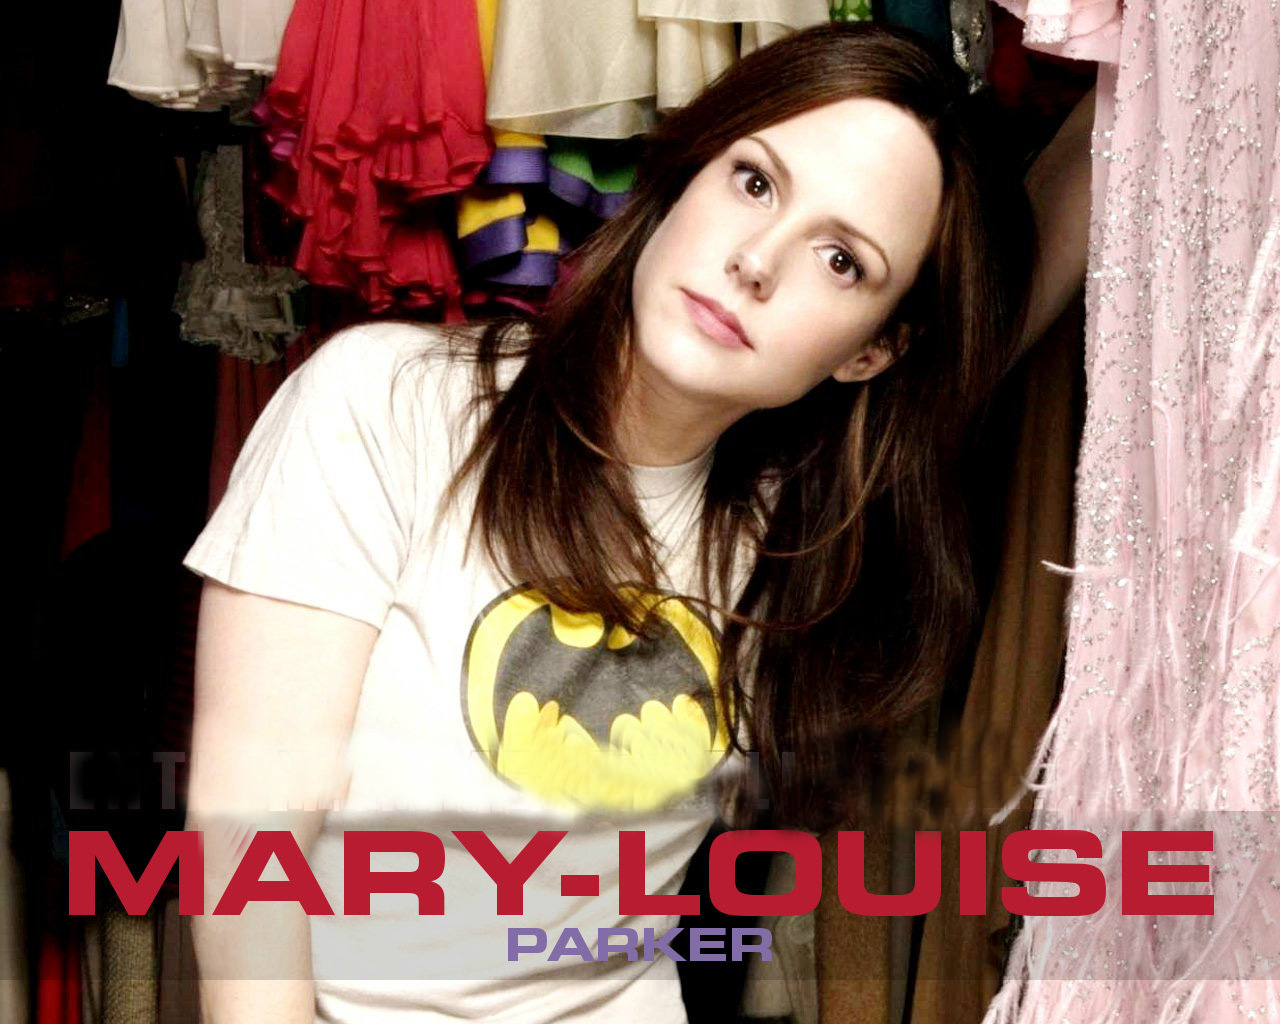 Wallpaper 7of 11 | Mary Louise Parker Images. | Mary Louise Parker | Mary Louise Parker Images.